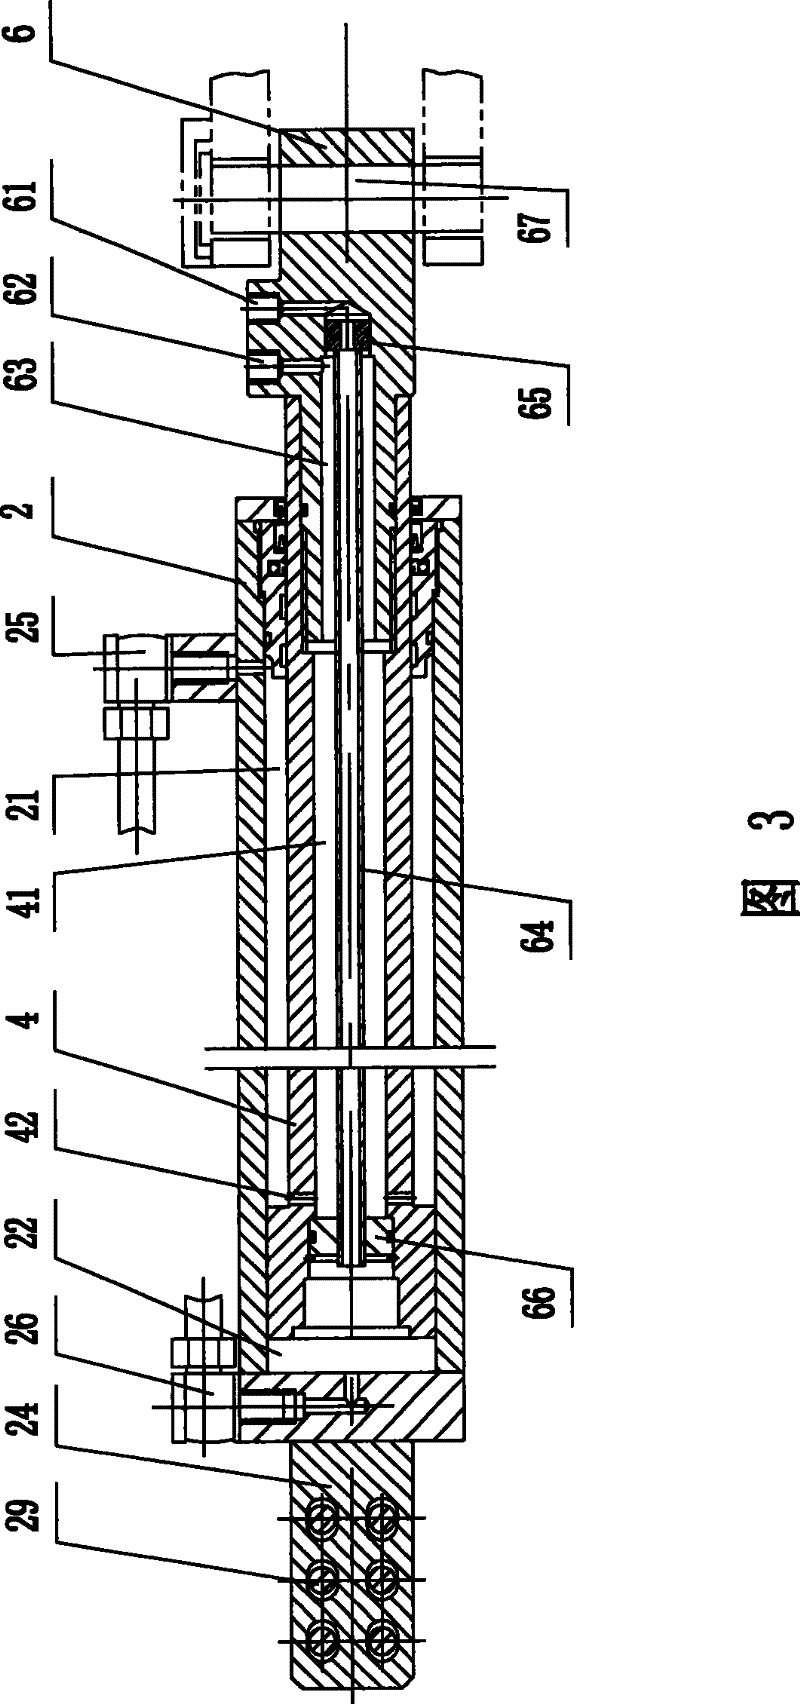 Cylinder set for use in retraction mechanism